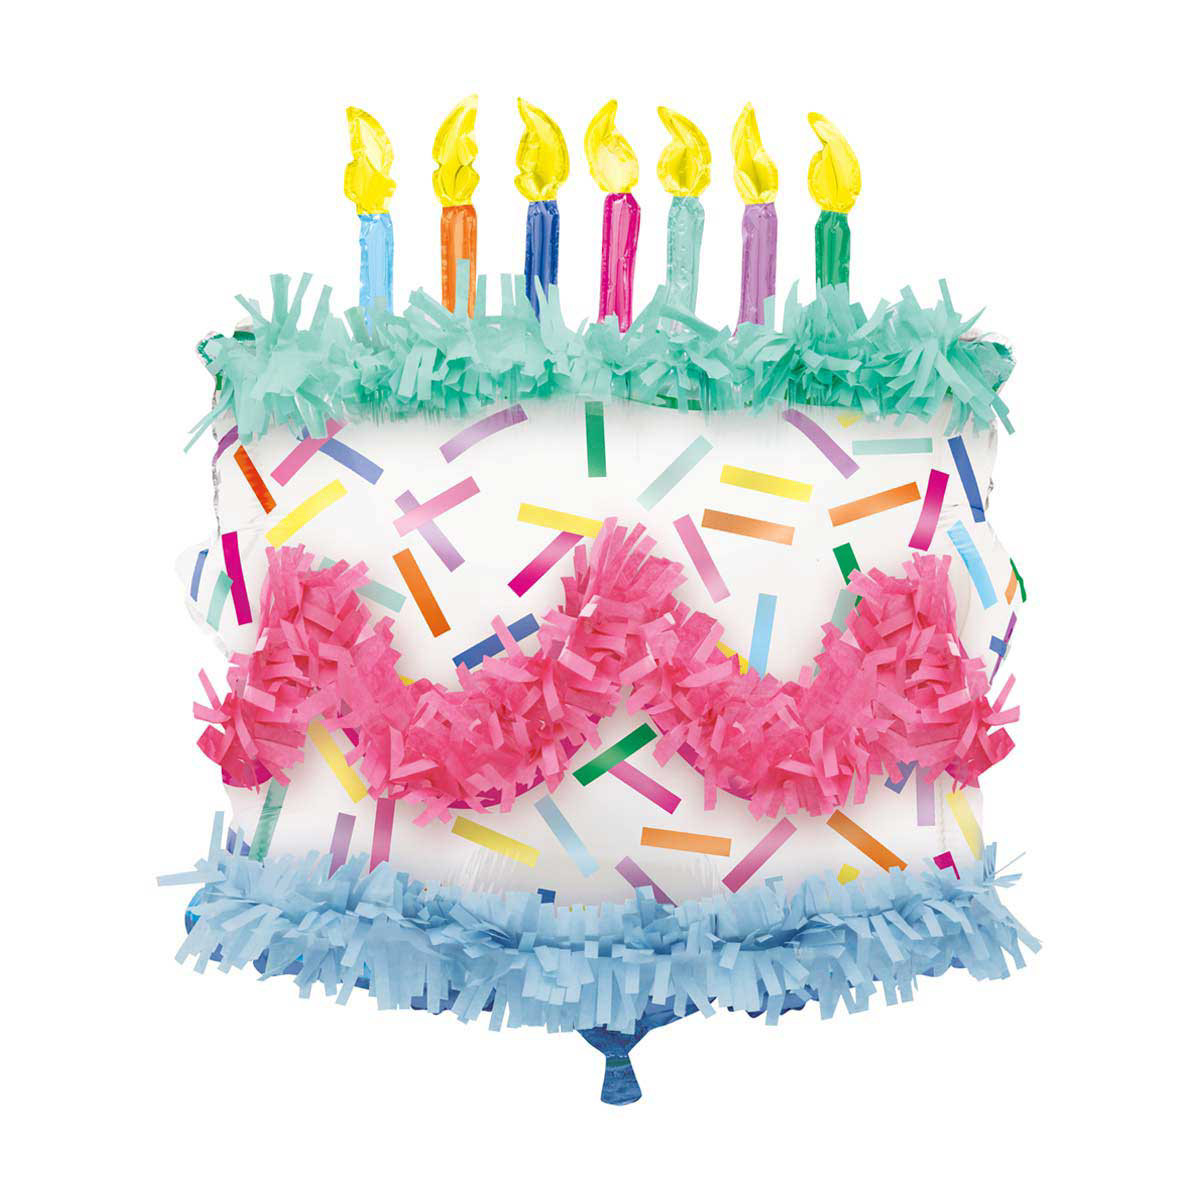 321 Party! Giant Foil Pink Sprinkles Cake Shaped Balloon with Tissue Festoon, 25 in